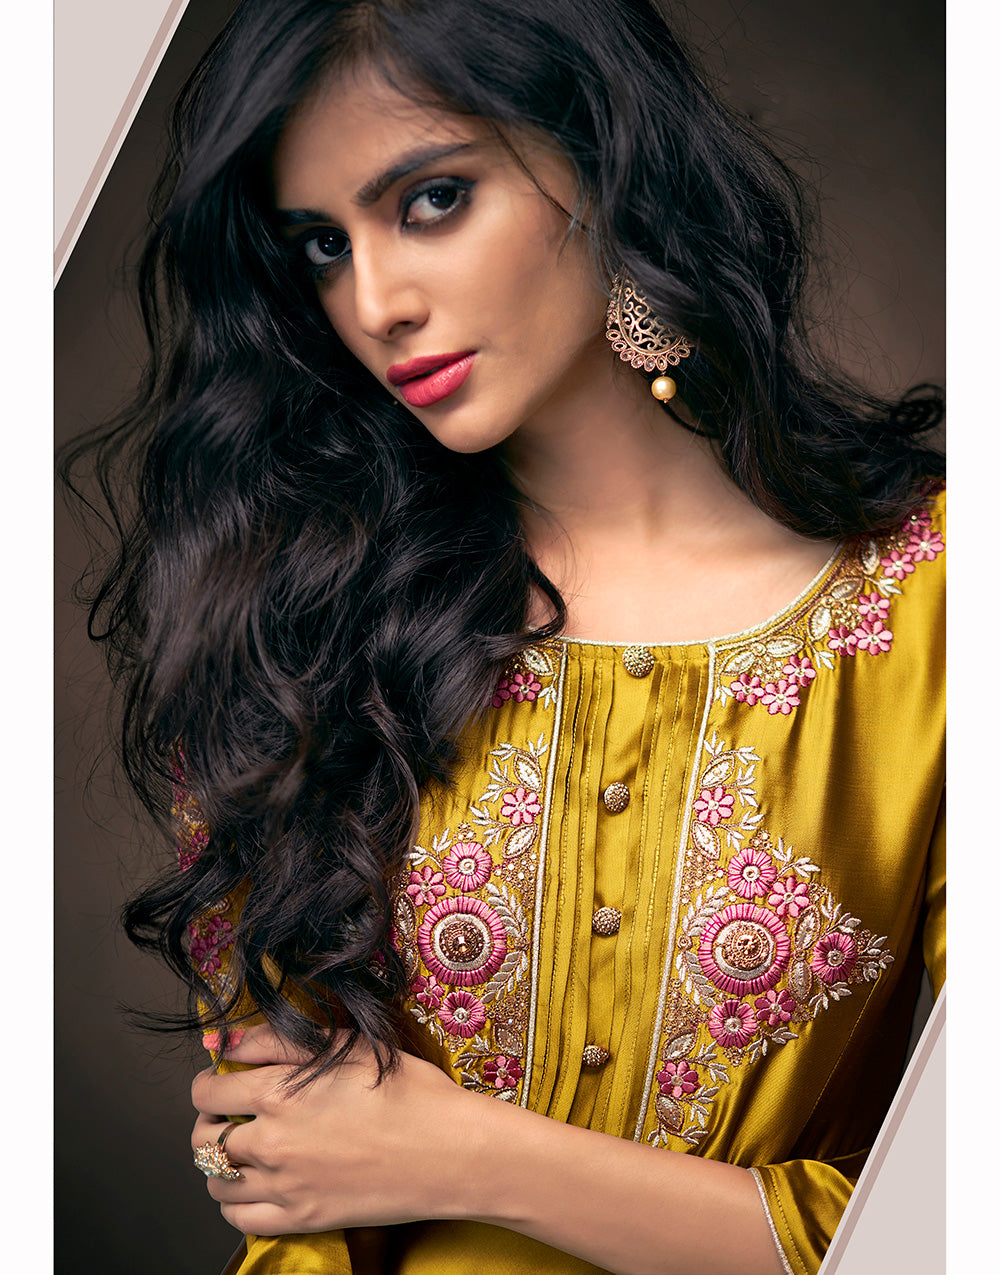 Mustard Yellow Triva Satin Silk With Embroidered Work Gown